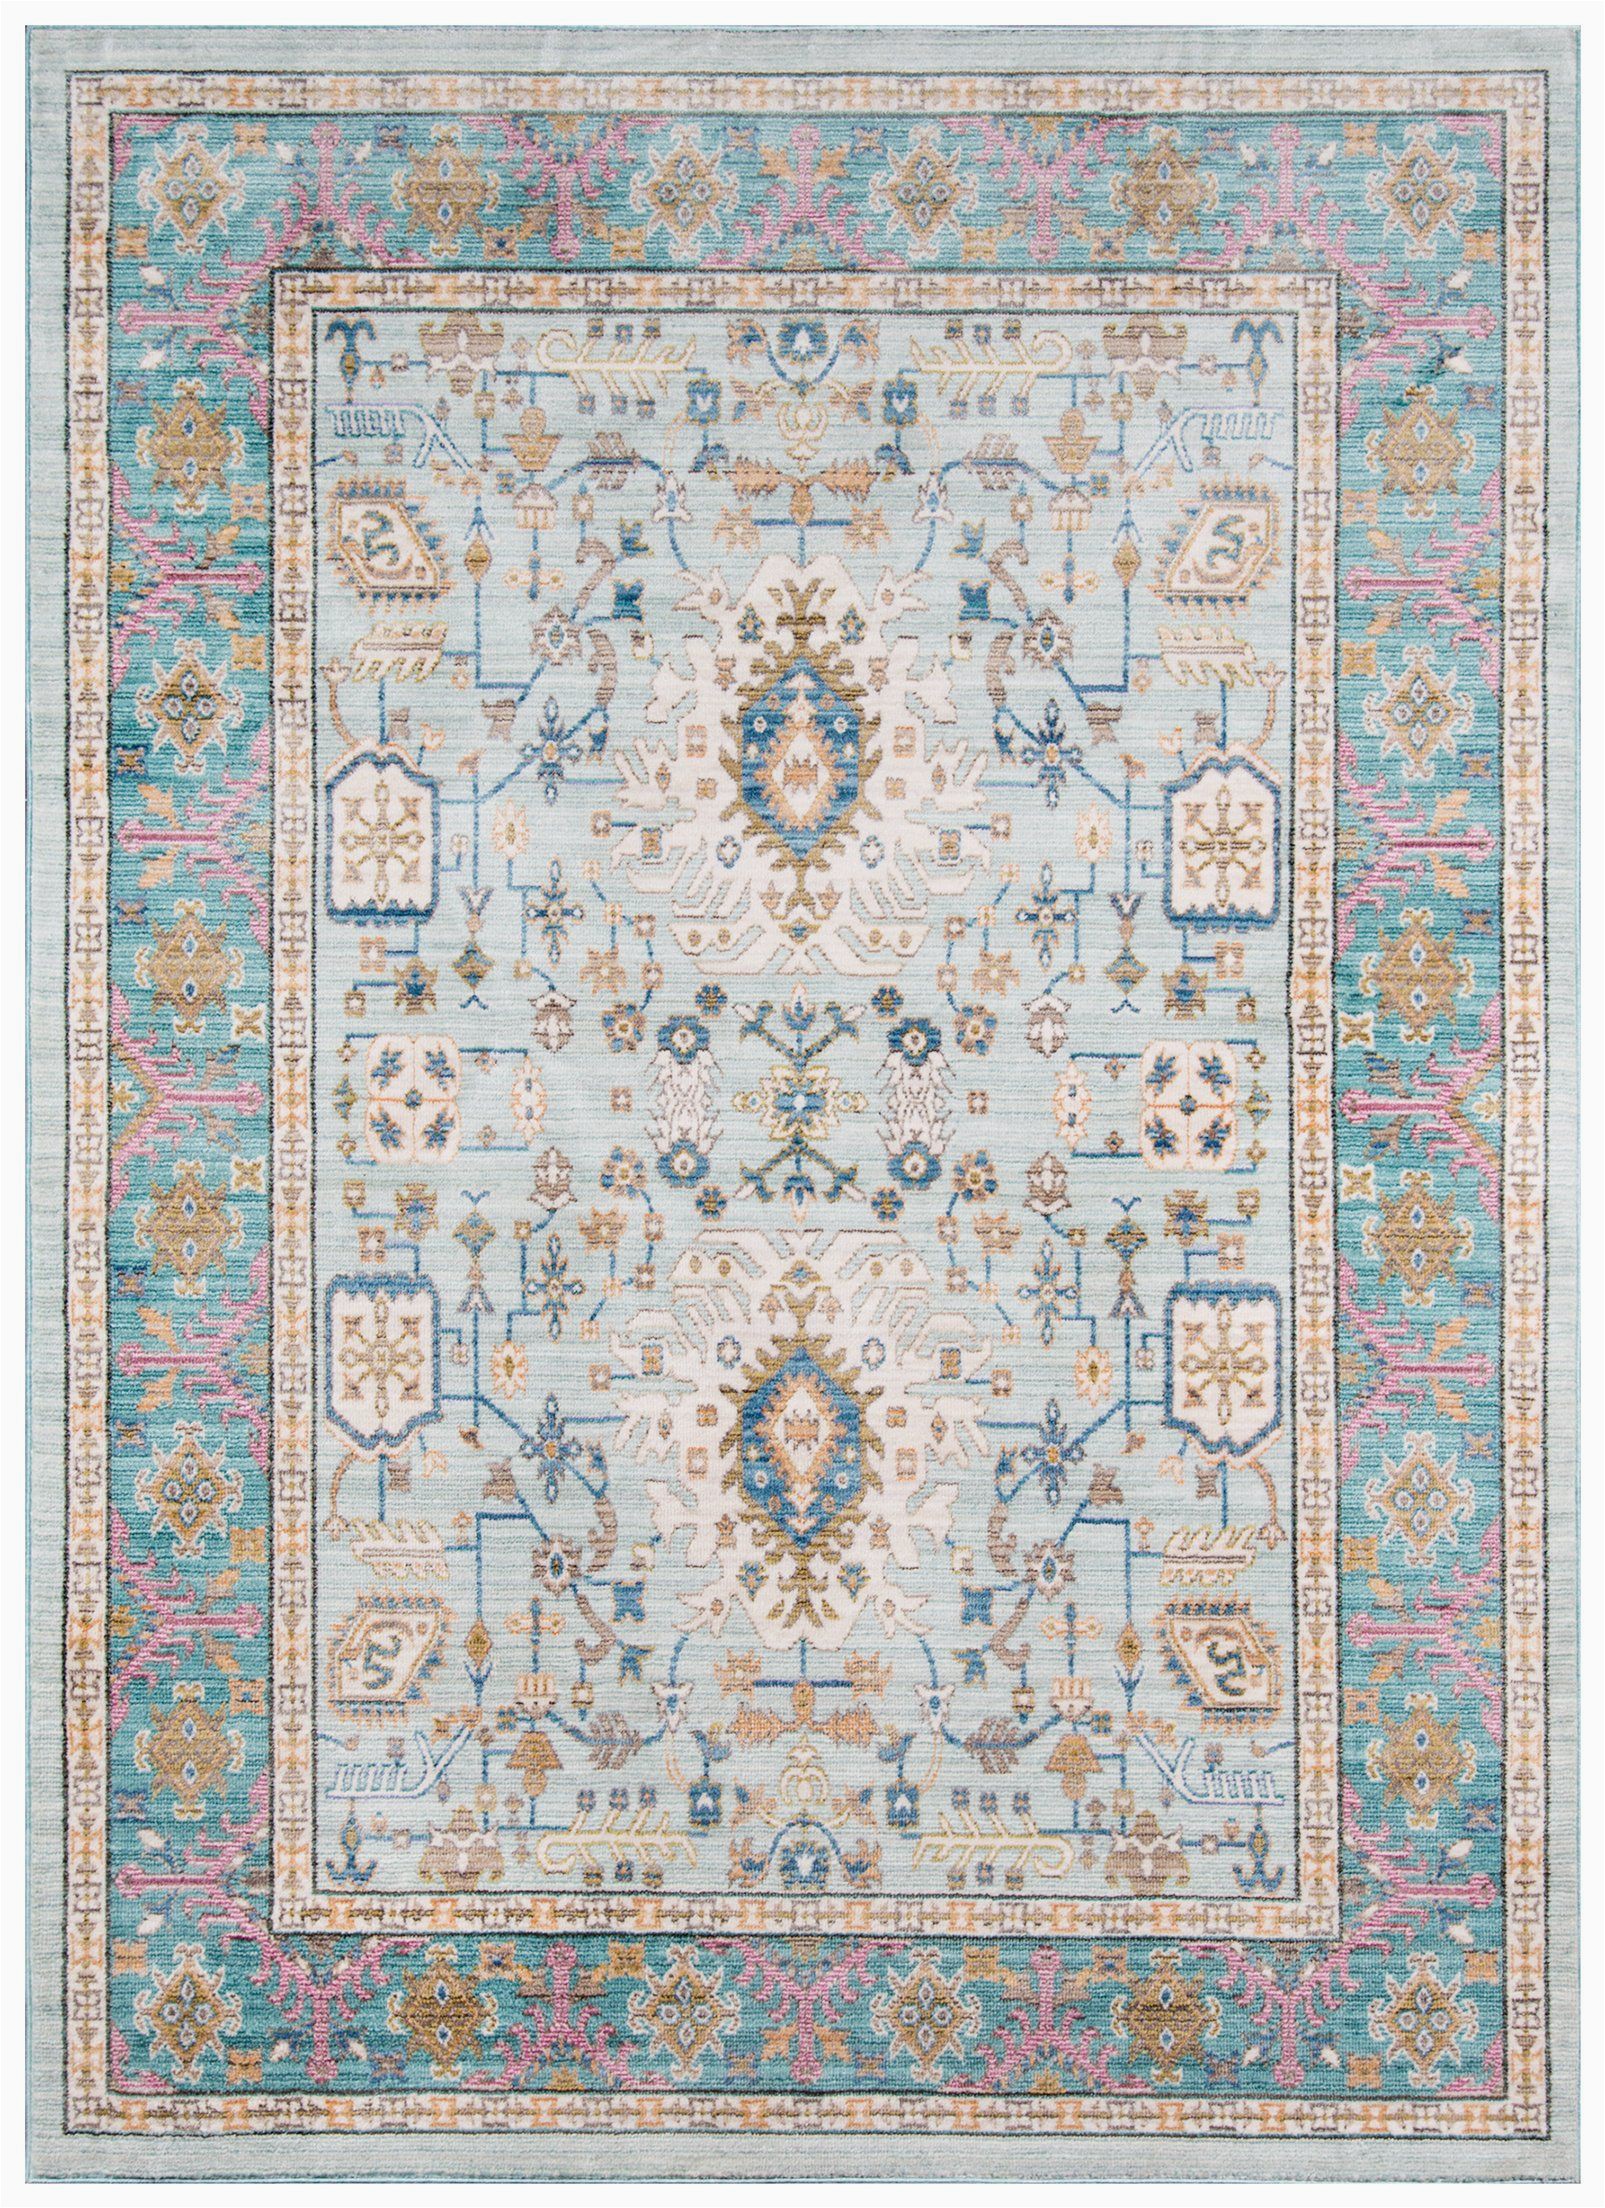 Pink and Teal area Rug Shabby Chic Teal Blue Pink area Rug